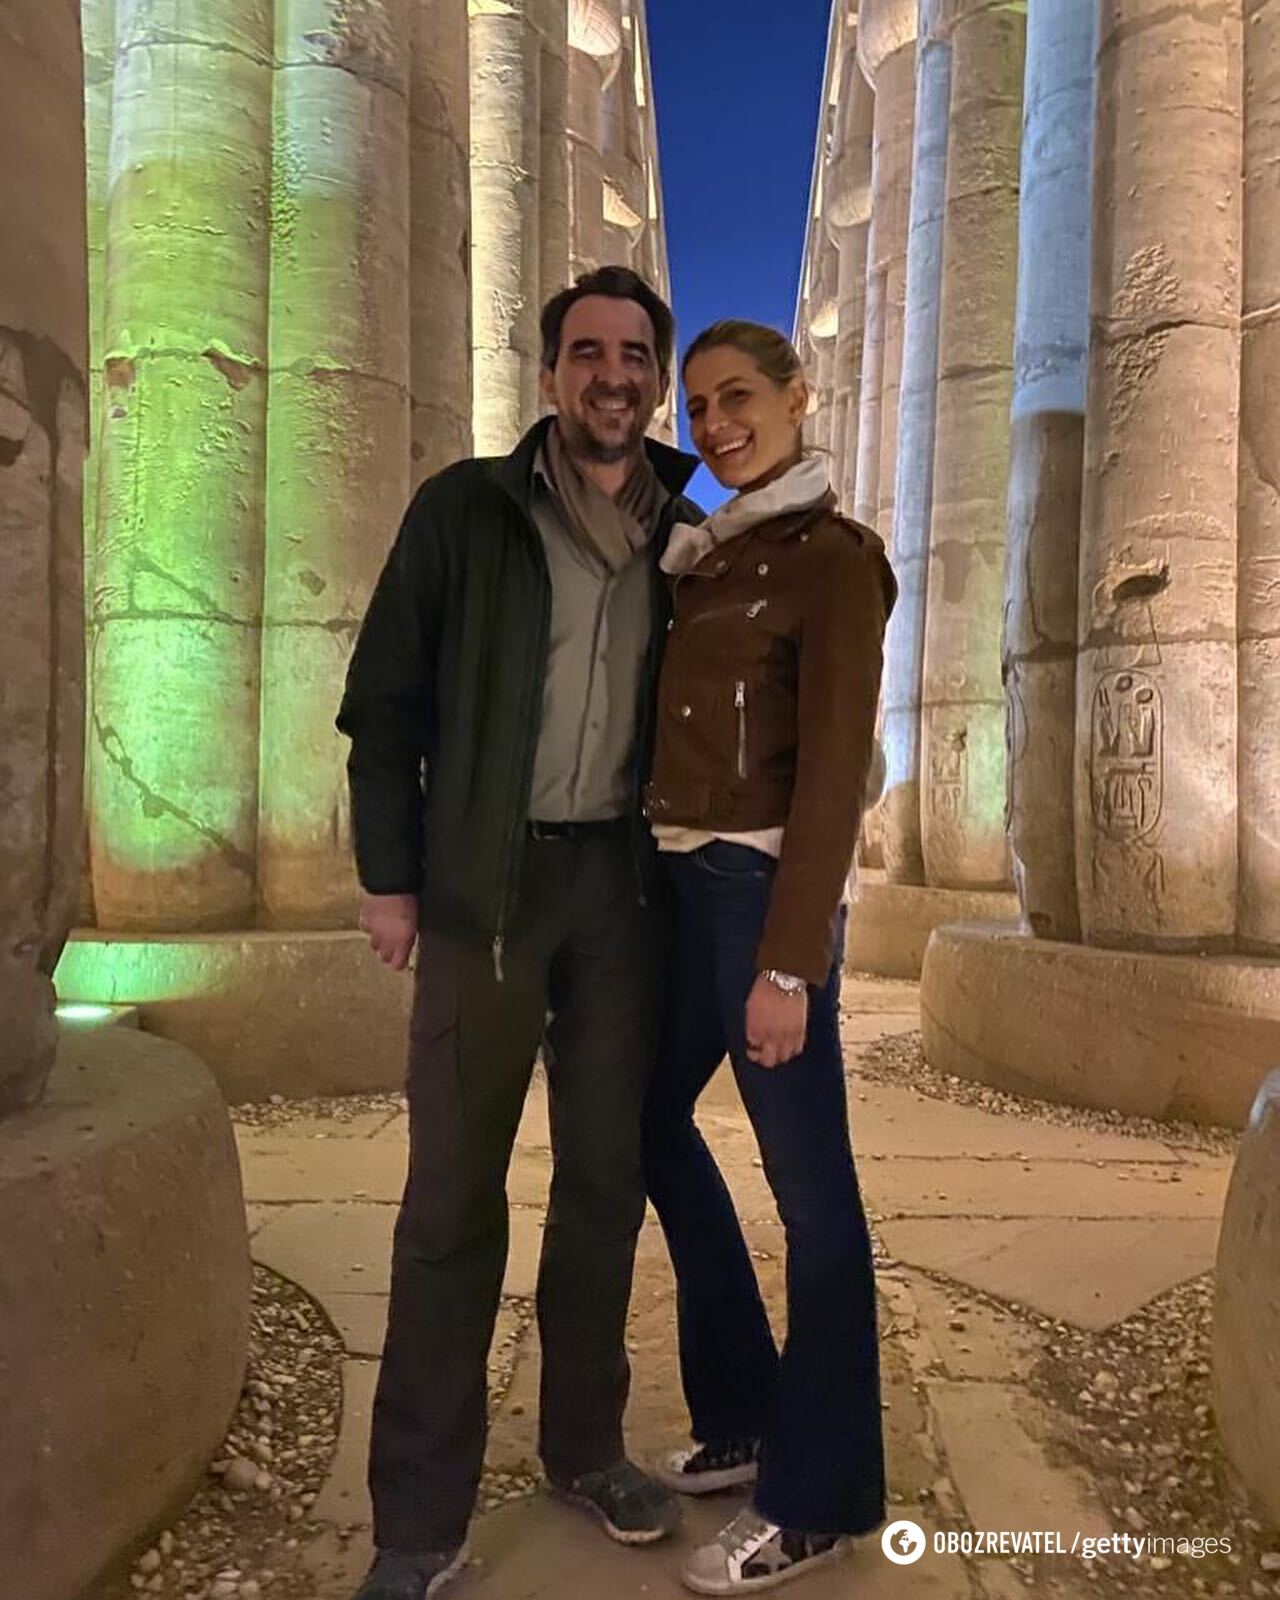 Greek Prince Nikolaos and Princess Tatiana shocked with news of divorce after 14 years of marriage